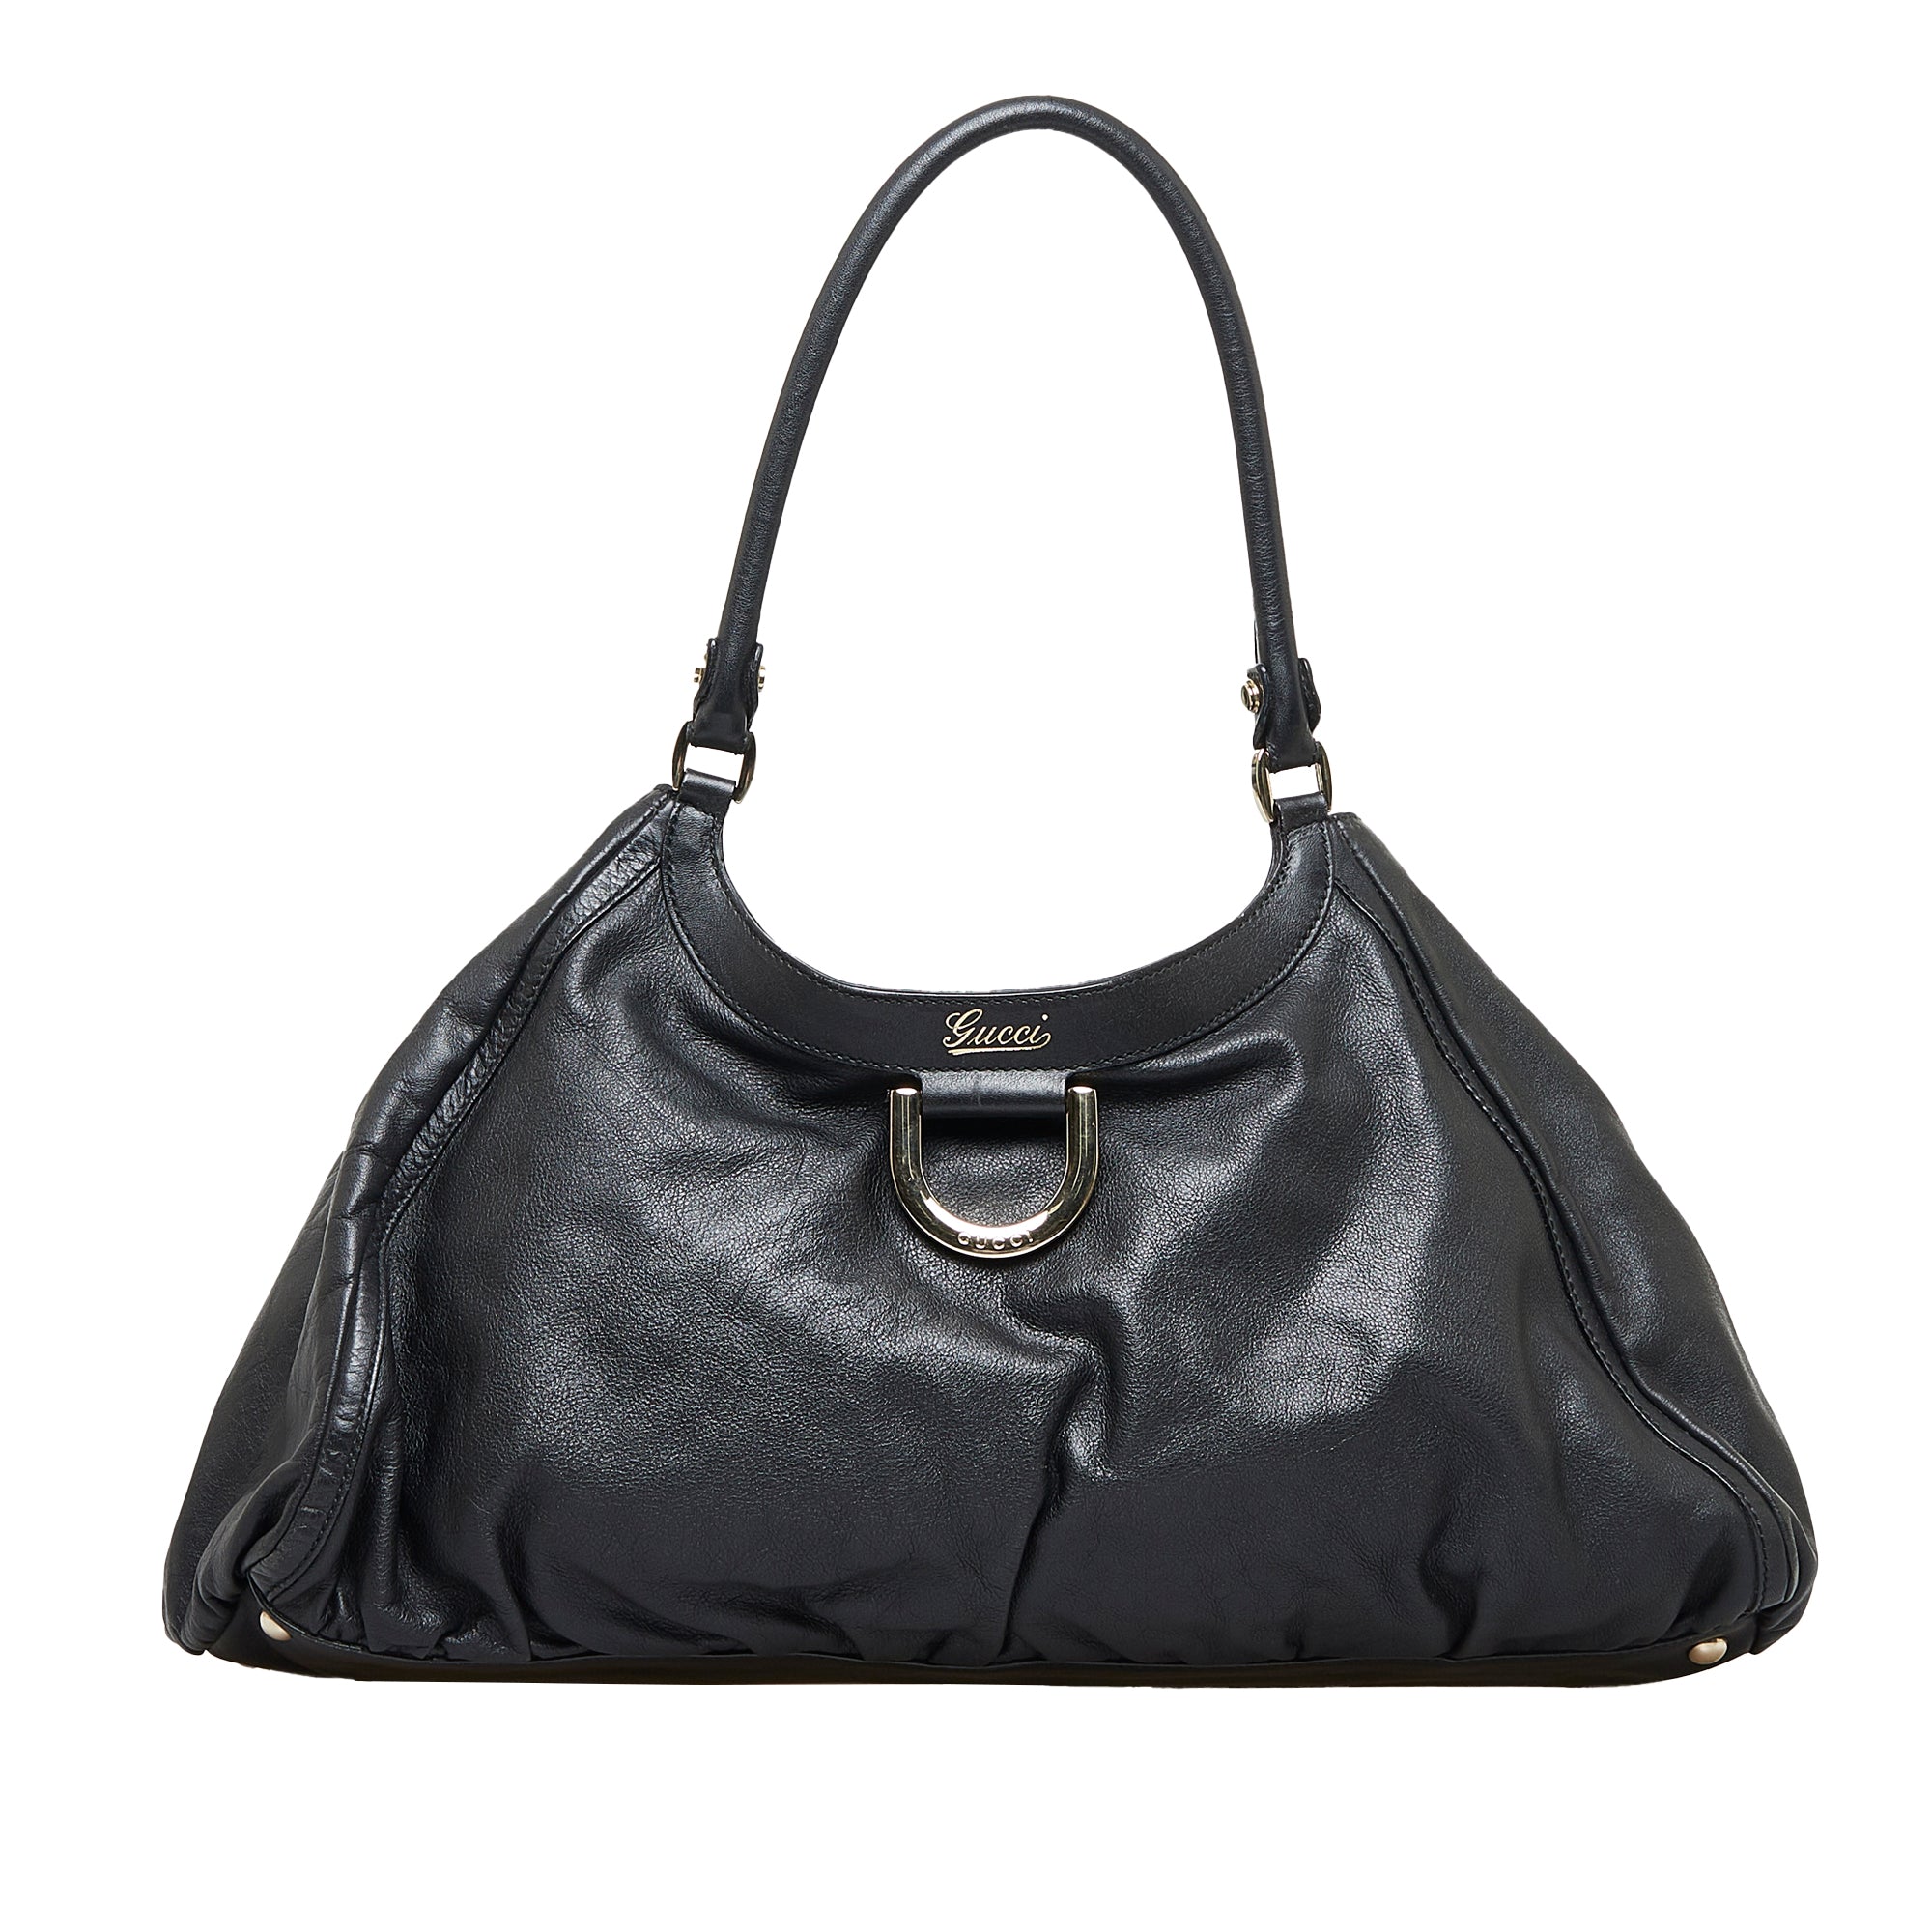 D-ring leather handbag Gucci Black in Leather - 25925835